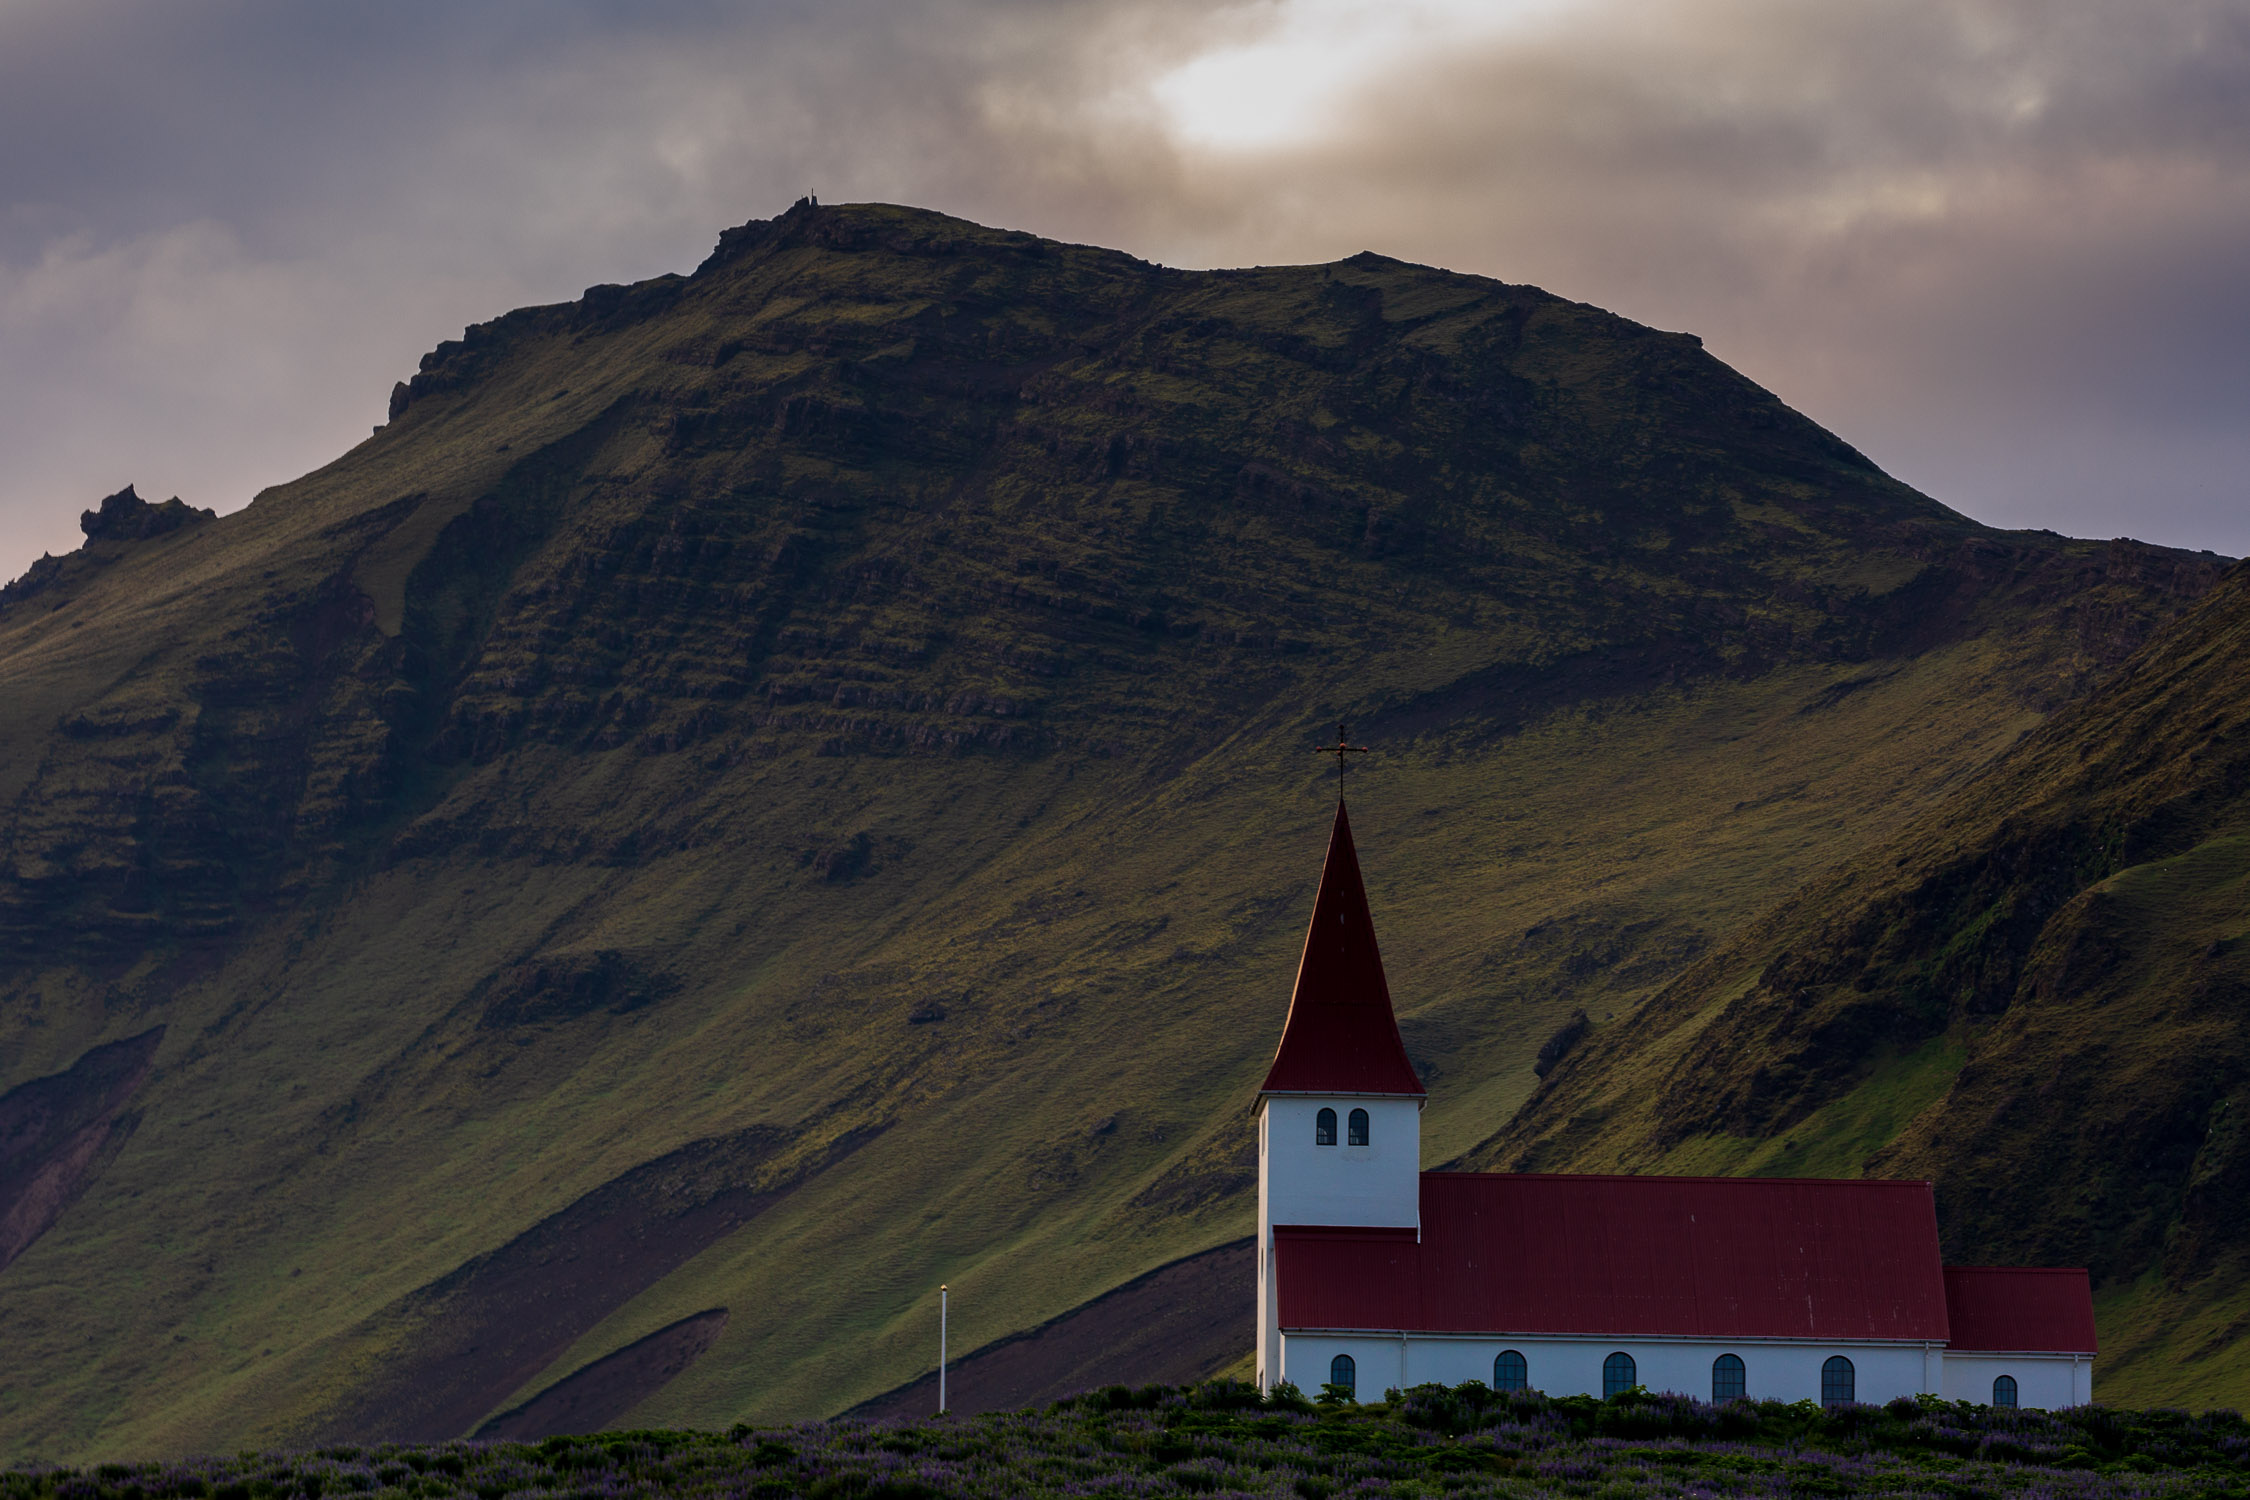 Reynisfjall and the church, Vik